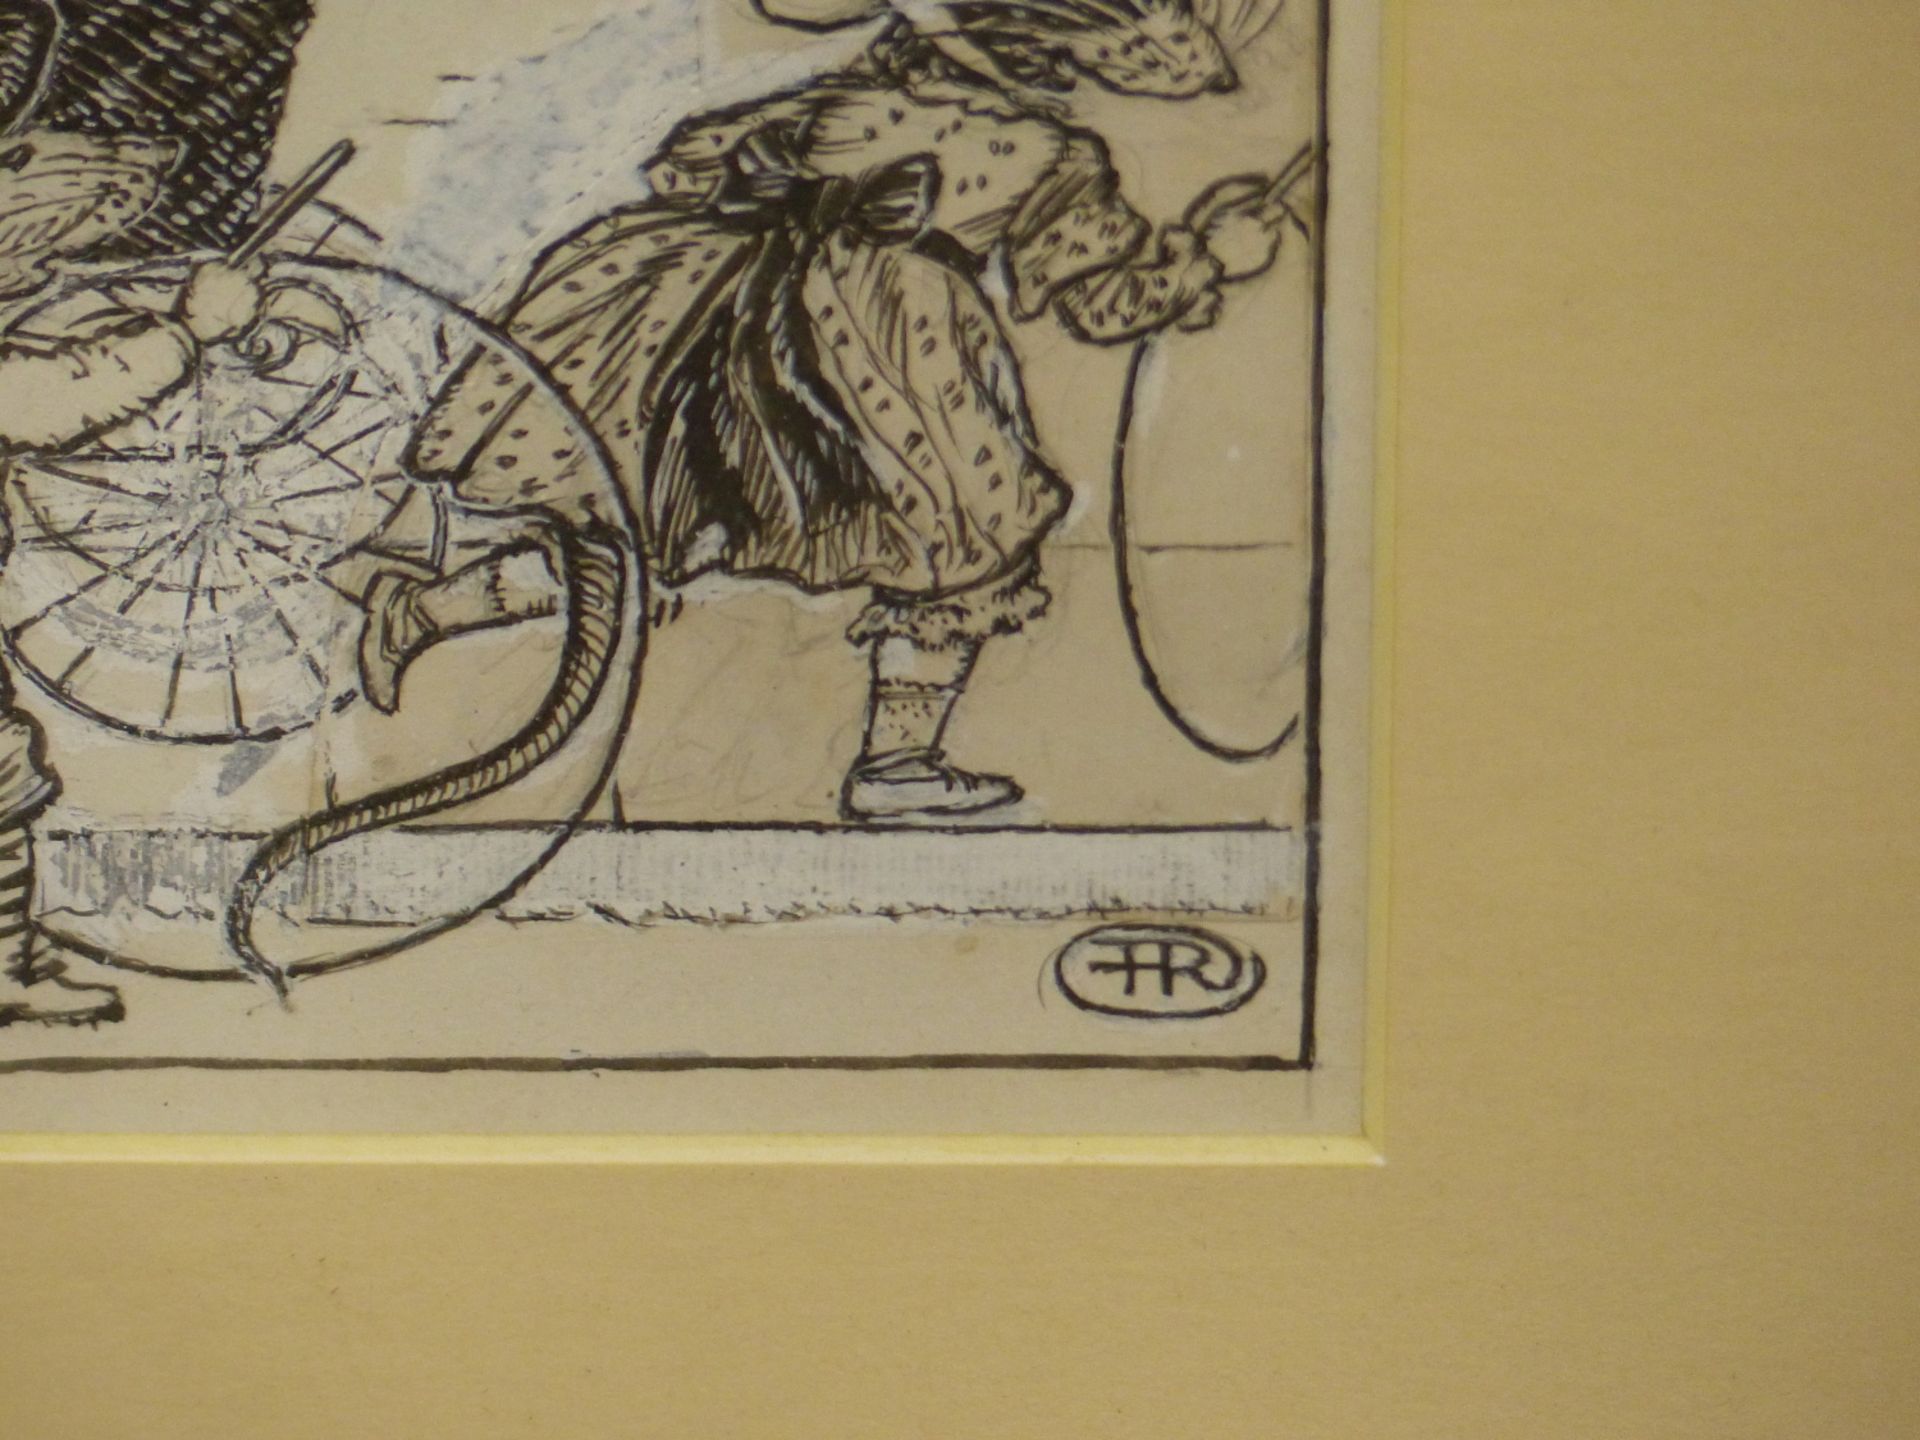 F.R. 20TH CENTURY CARTOONIST .TWO ILLUSTRATION WITH ANTHROPOMORPHIC MICE. PEN INK AND WATERCOLOUR. - Image 4 of 5